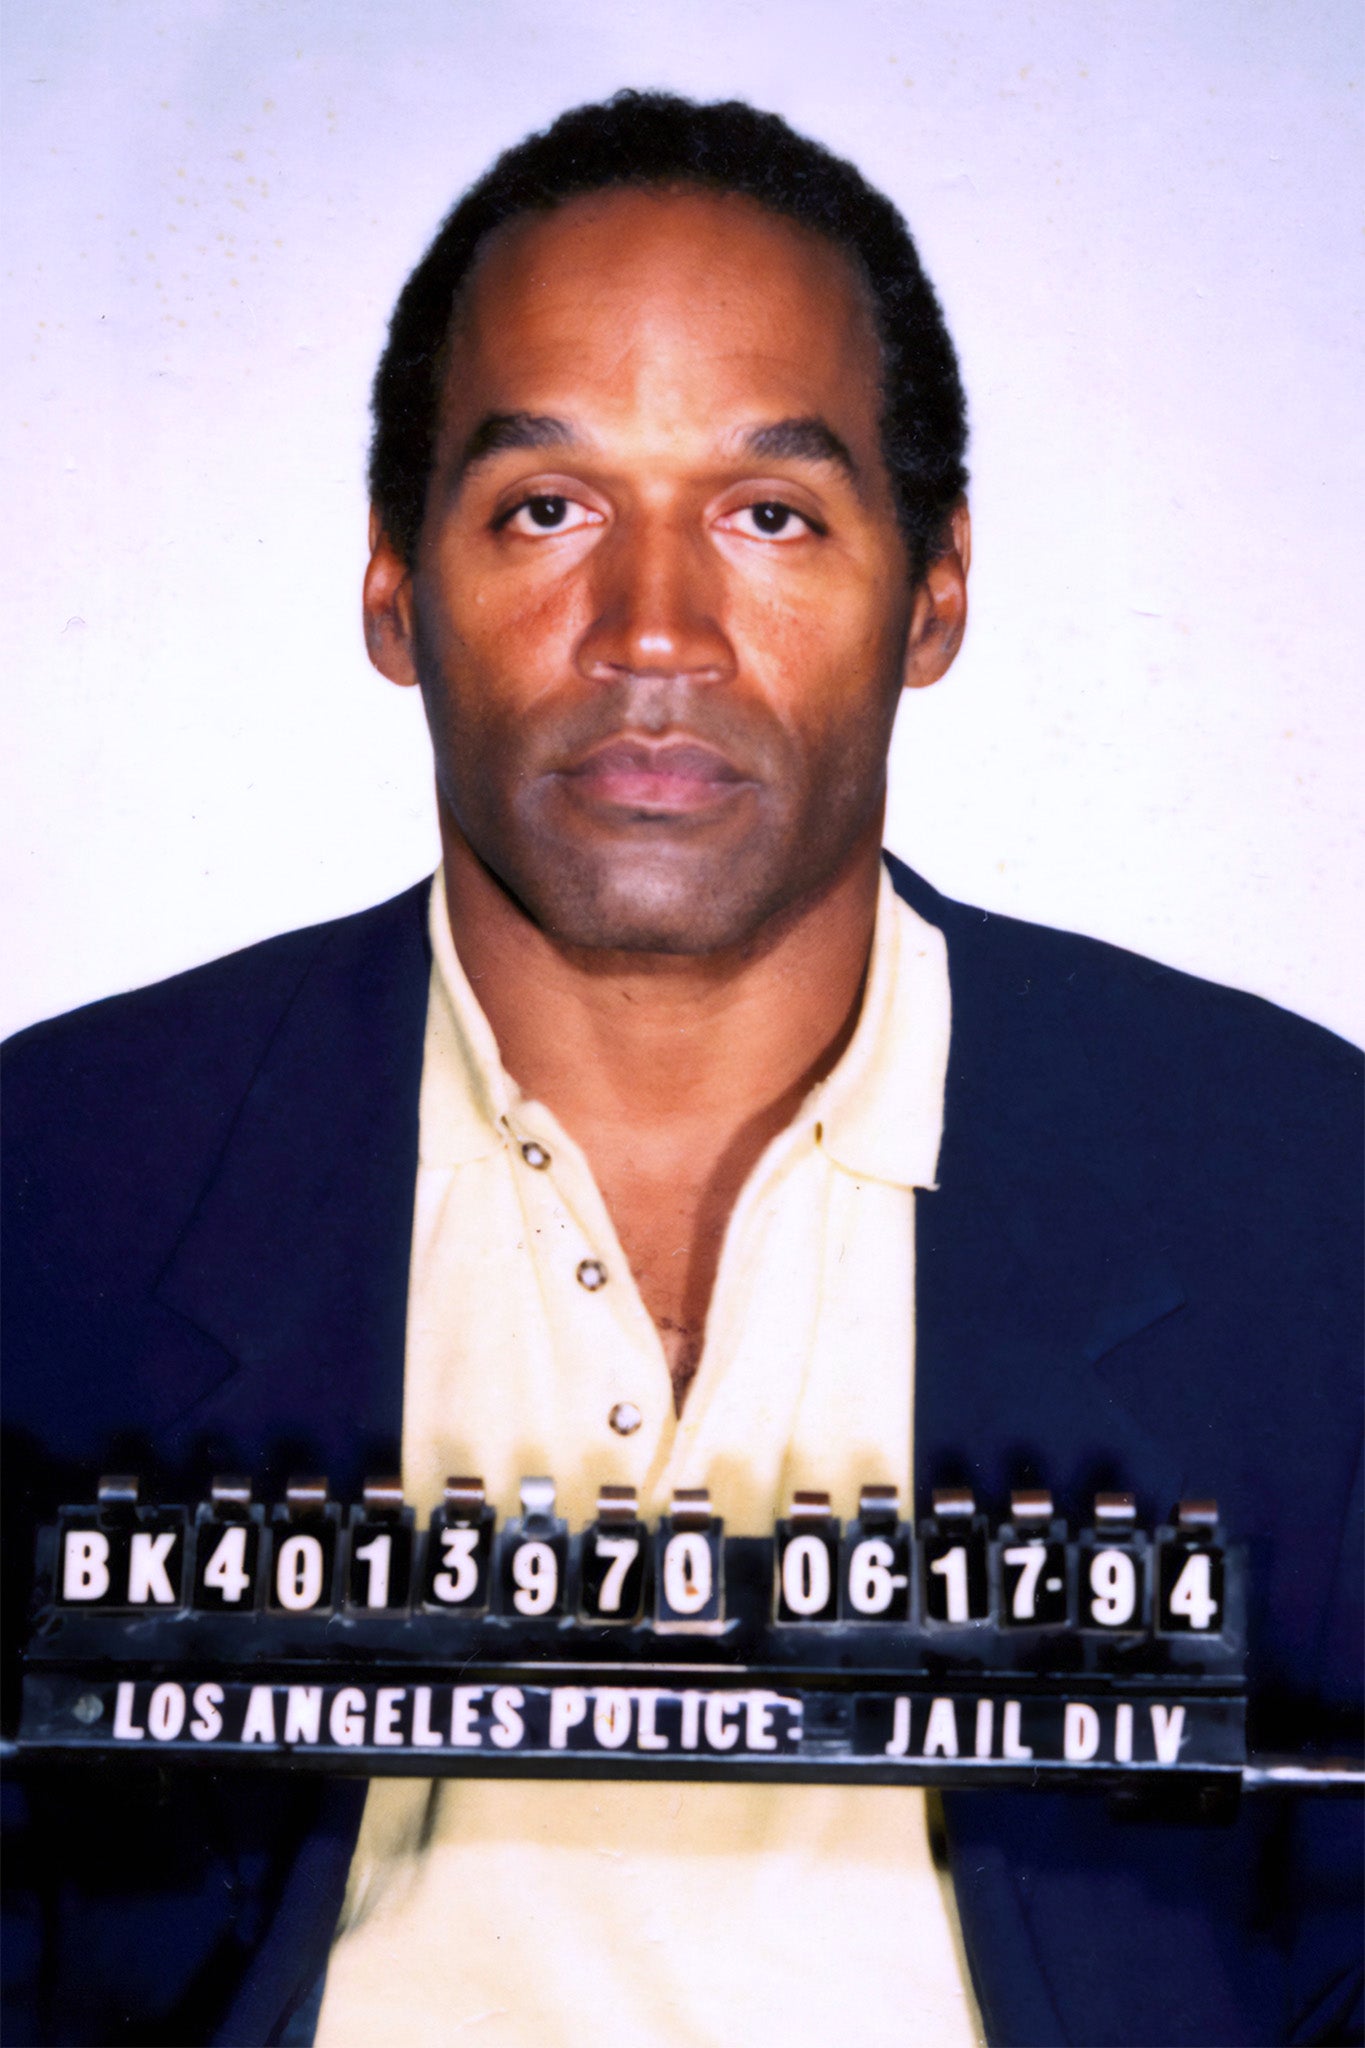 OJ Simpson was arrested in June 1994 after leading police on a slow-speed chase through Los Angeles, eventually being found not guilty of murdering his ex-wife and her friend – though the NFL player’s legal troubles continued